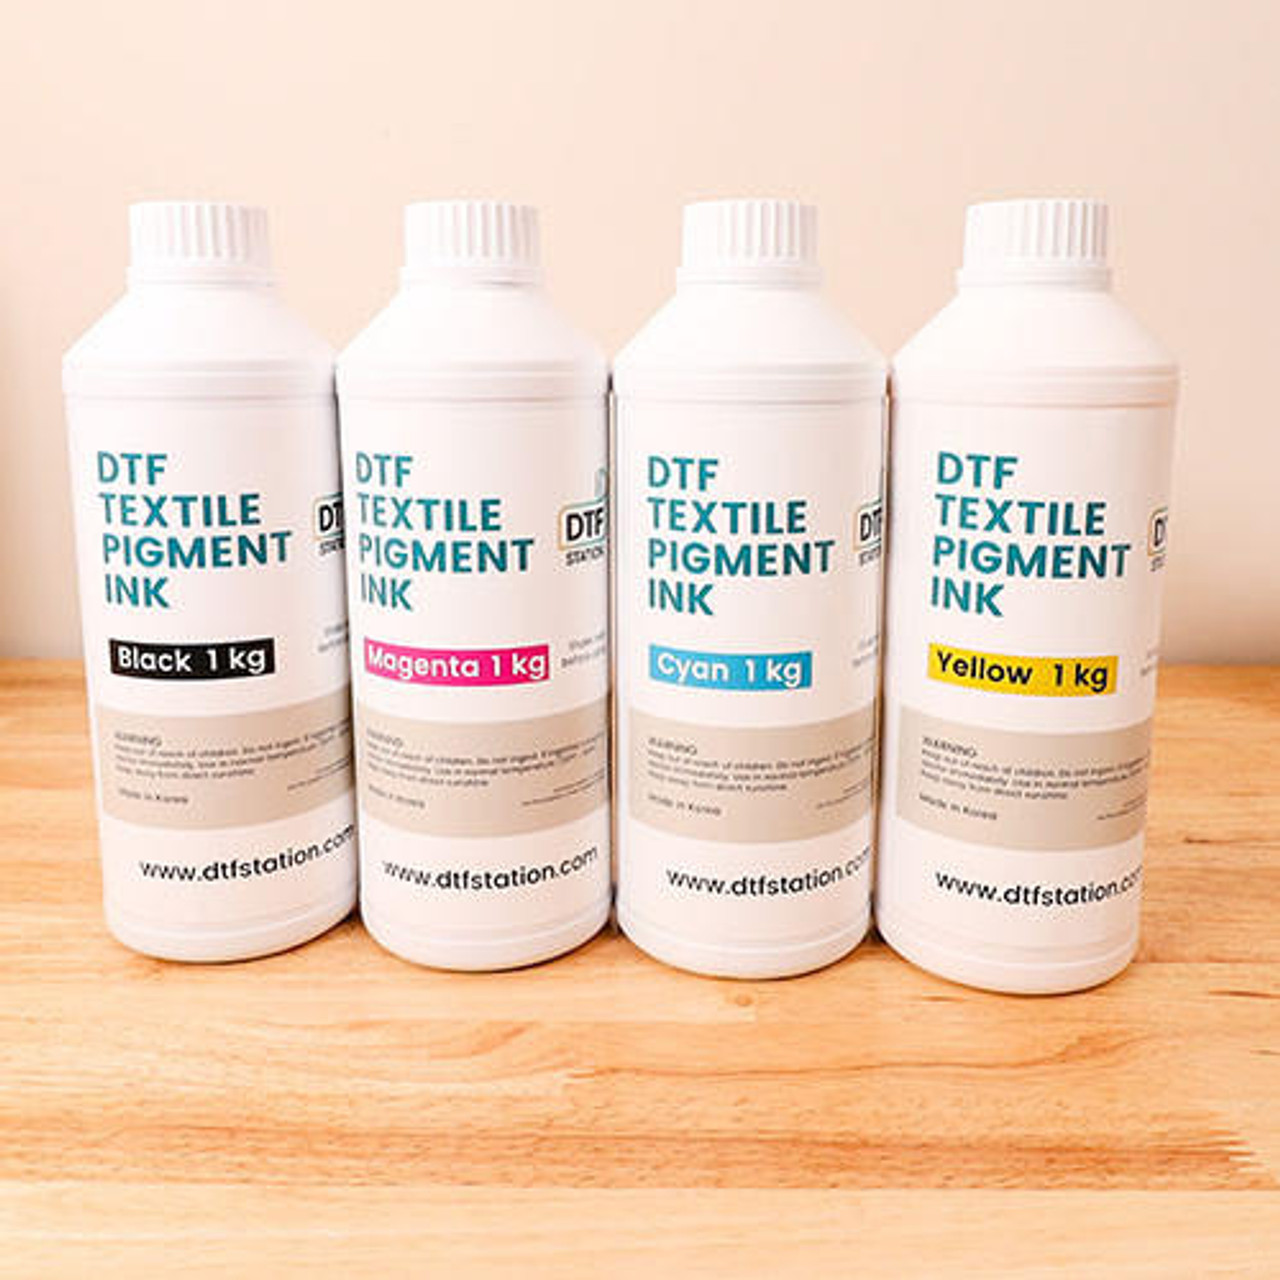 Dtf DTF direct to Film Best Ink Black Cyan Mag. Yellow White Dtf Ink Made  in Usa 